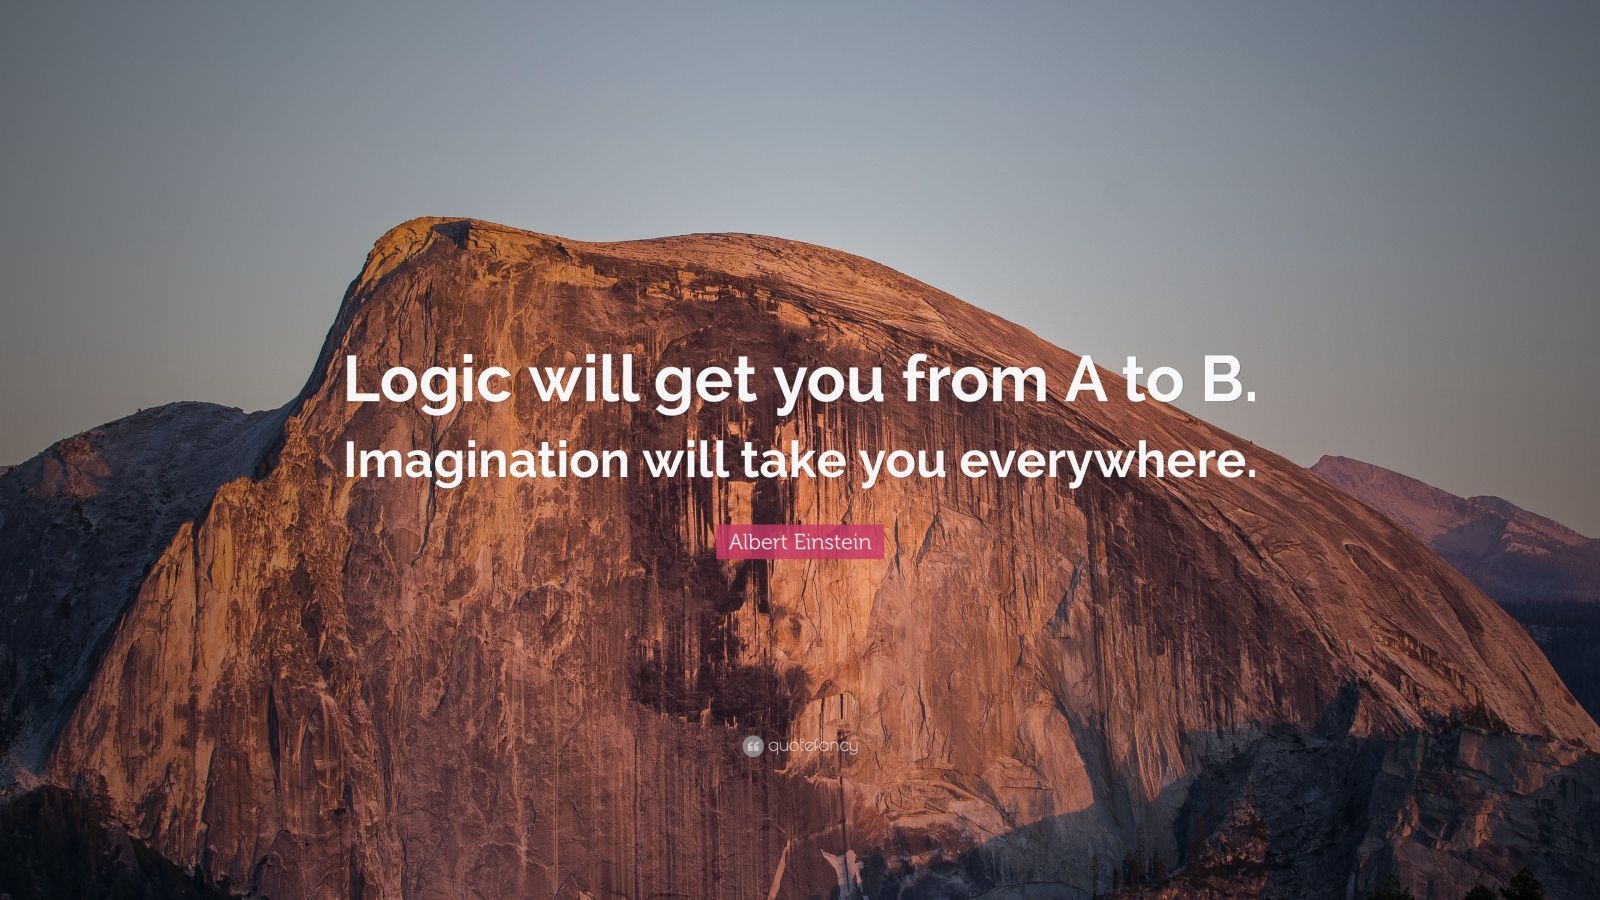 Albert Einstein Quote: “Logic will get you from A to B. Imagination